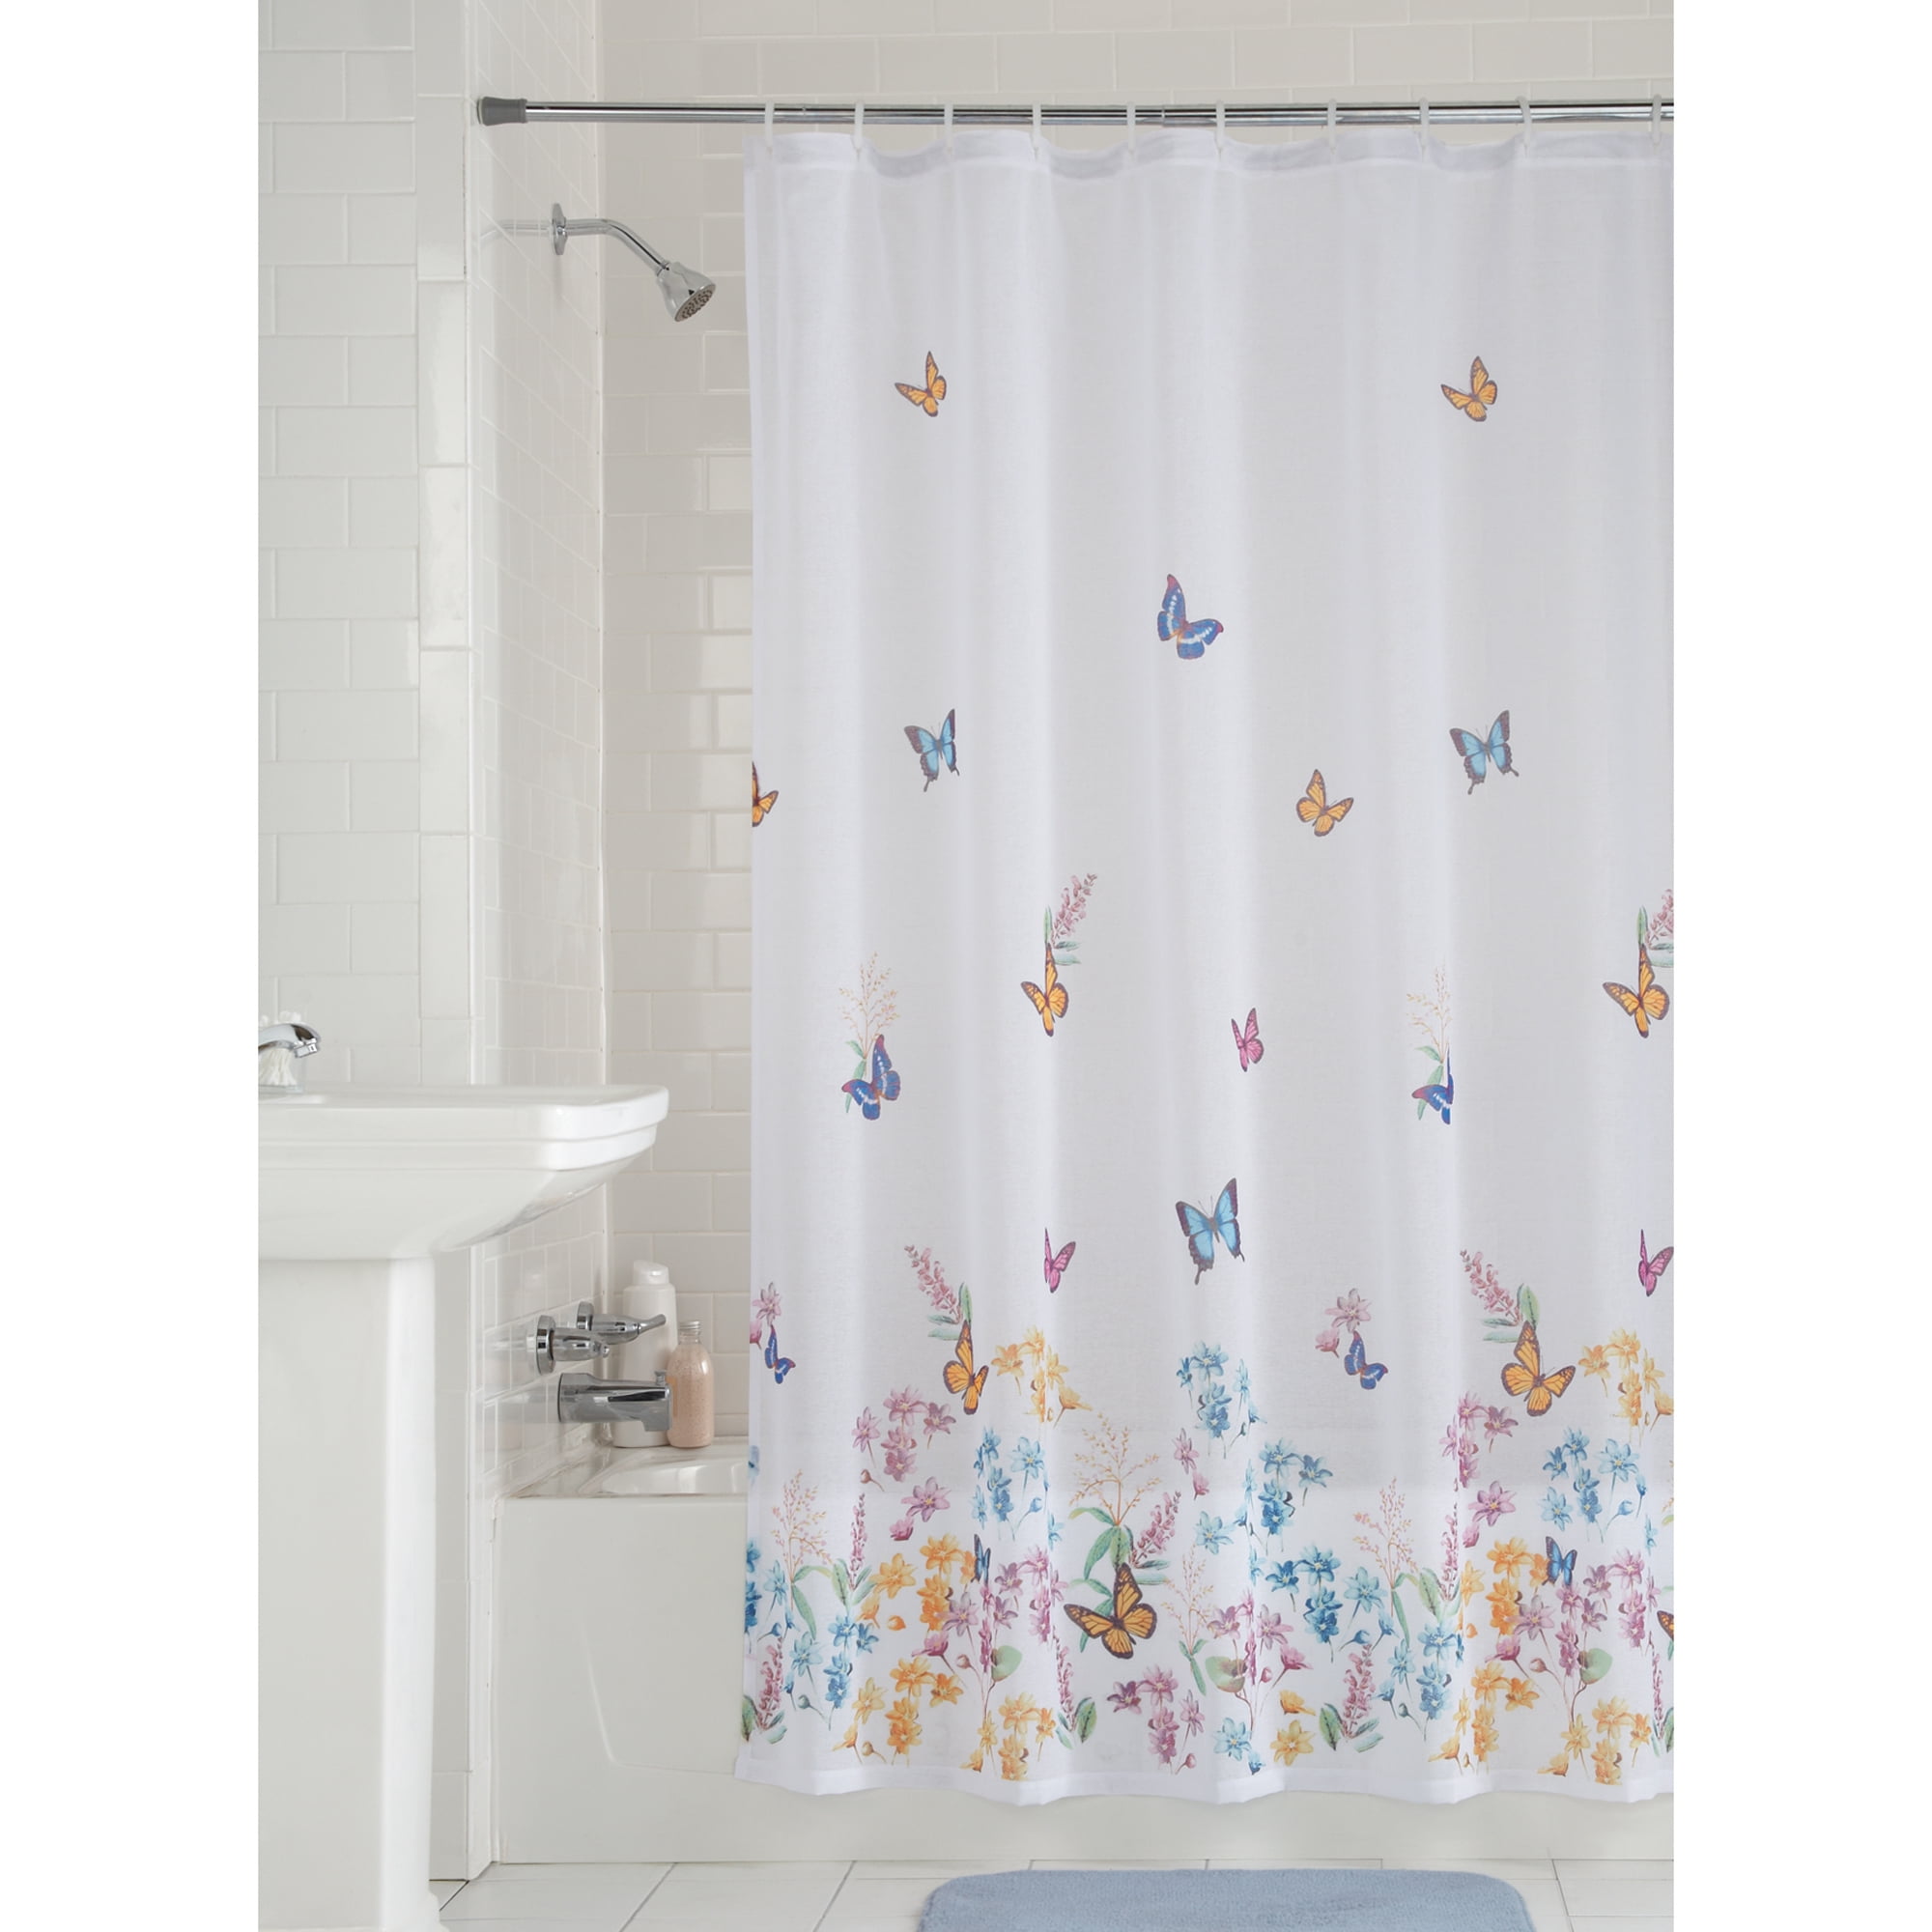 Details about   Panda and butterfly Shower Curtain Bathroom Decor Fabric & 12hooks 71" 